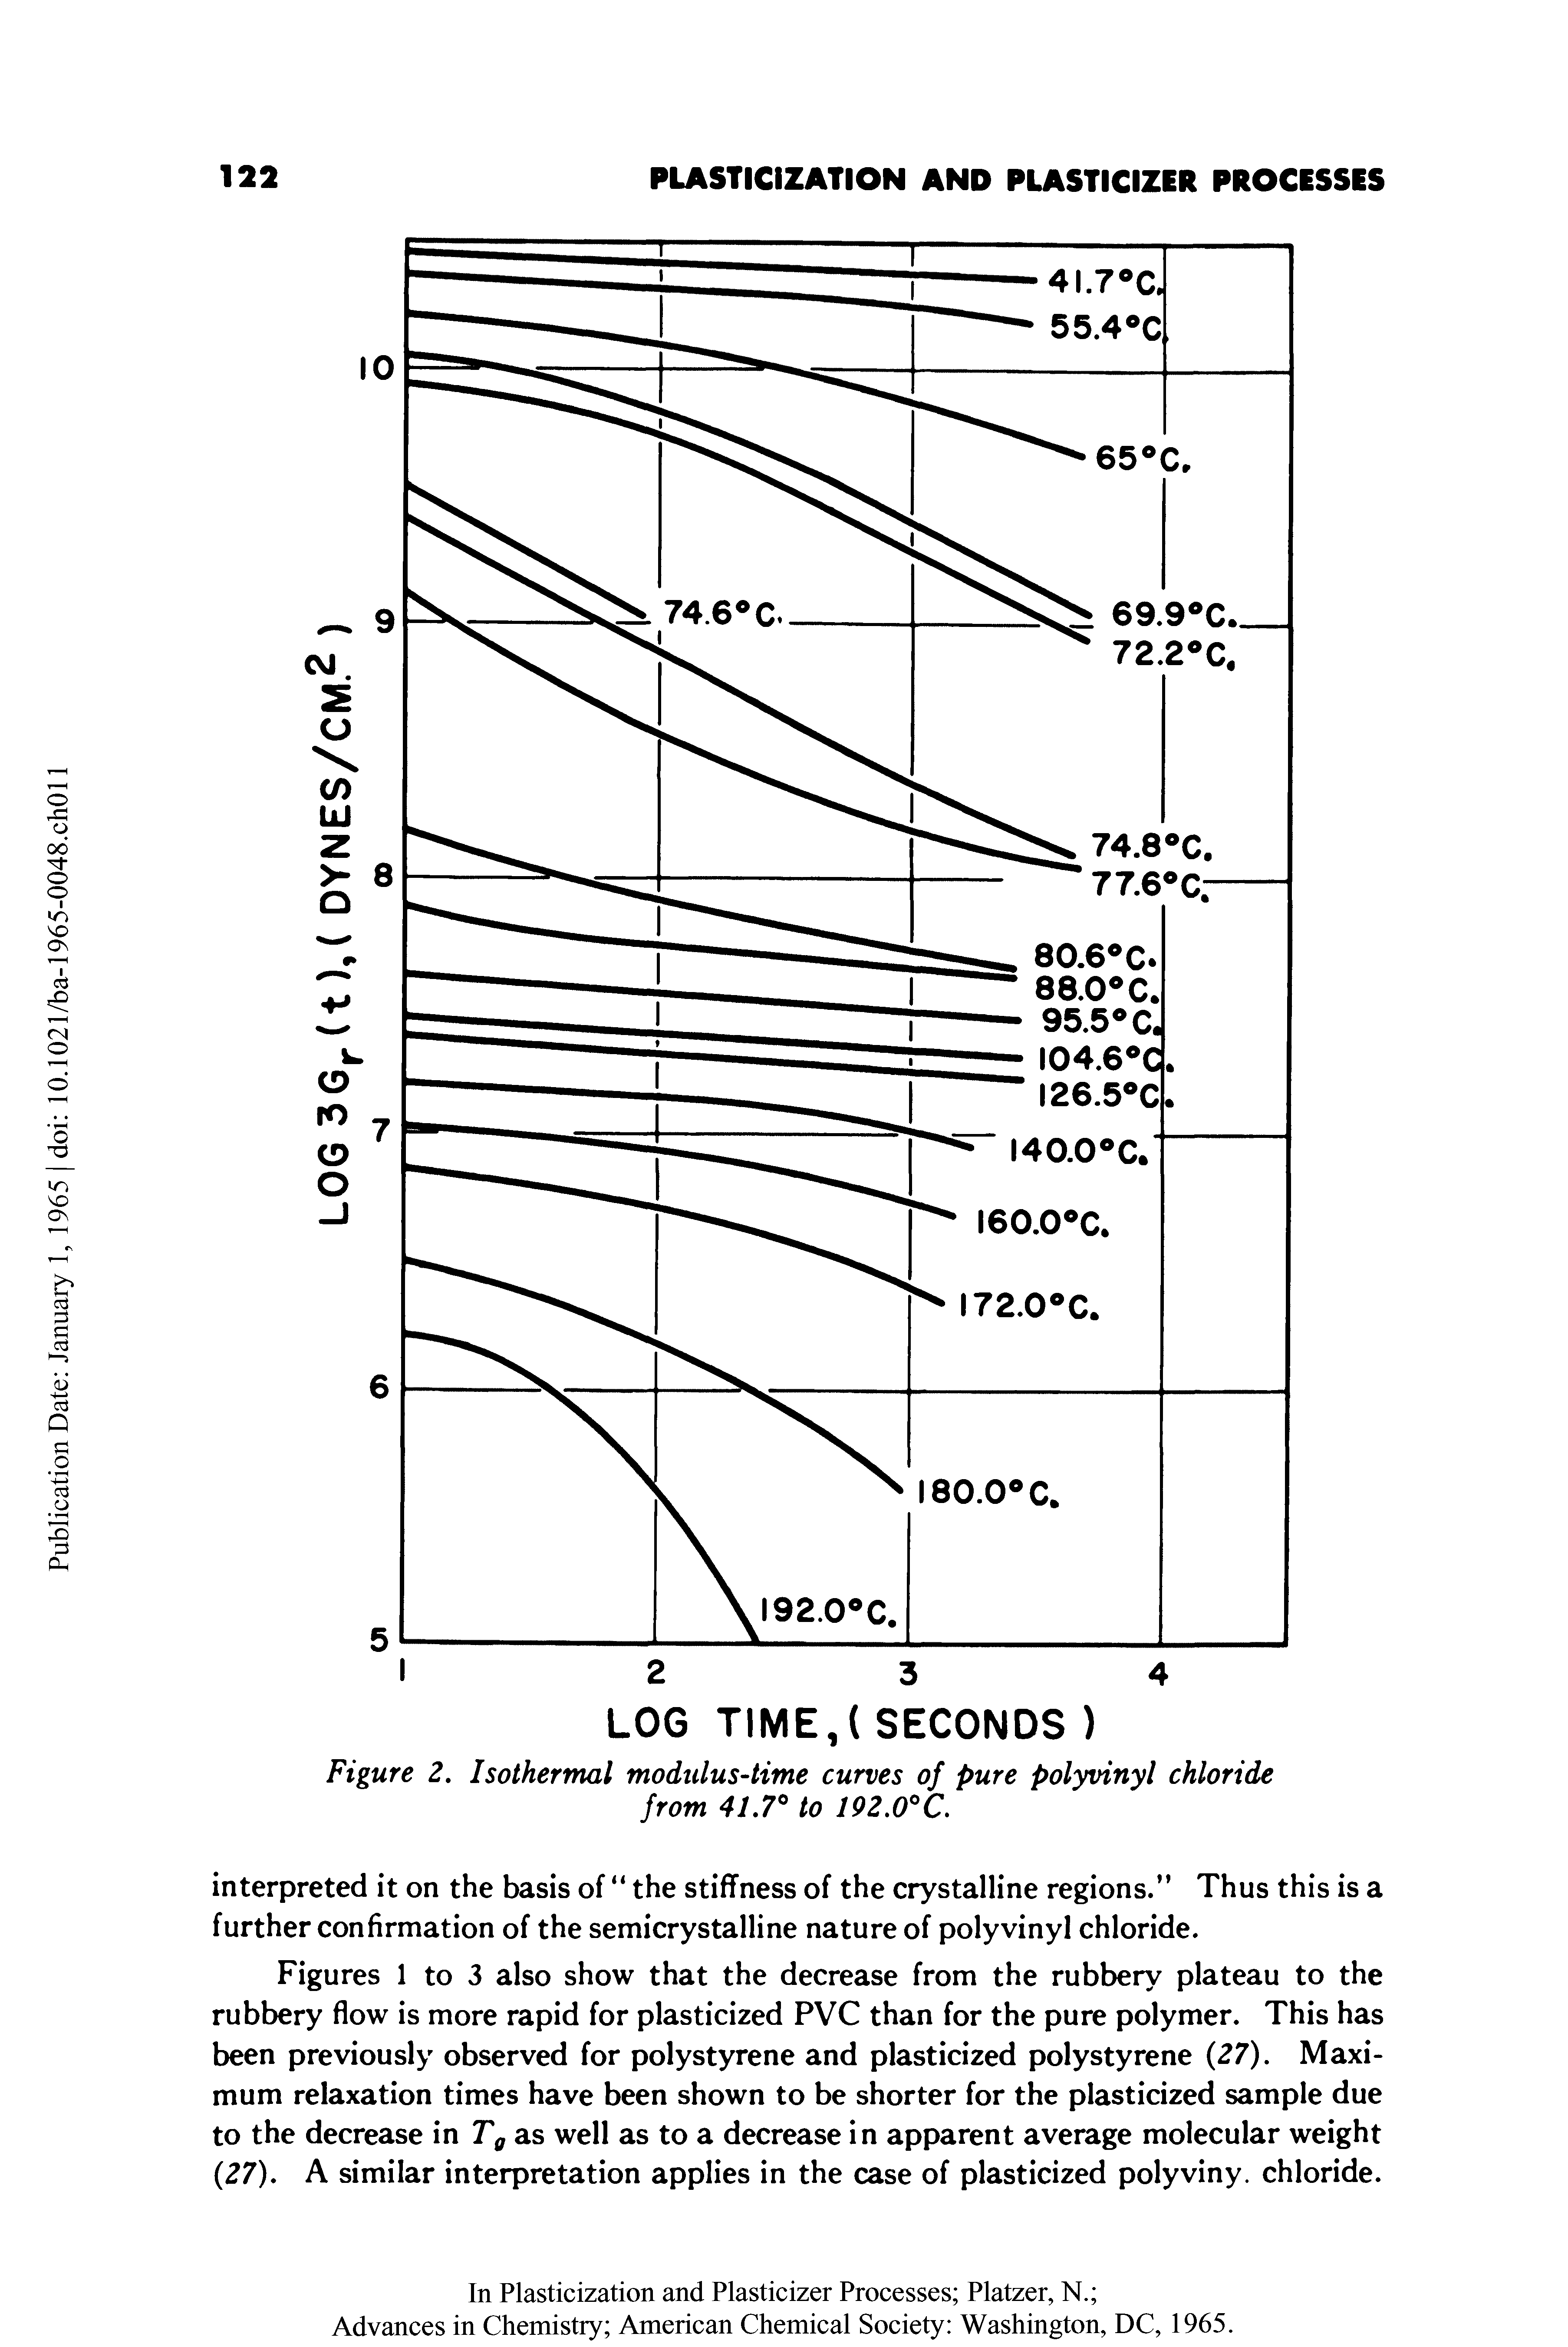 Figures 1 to 3 also show that the decrease from the rubbery plateau to the rubbery flow is more rapid for plasticized PVC than for the pure polymer. This has been previously observed for polystyrene and plasticized polystyrene (27). Maximum relaxation times have been shown to be shorter for the plasticized sample due to the decrease in T0 as well as to a decrease in apparent average molecular weight (27). A similar interpretation applies in the case of plasticized polyviny. chloride.